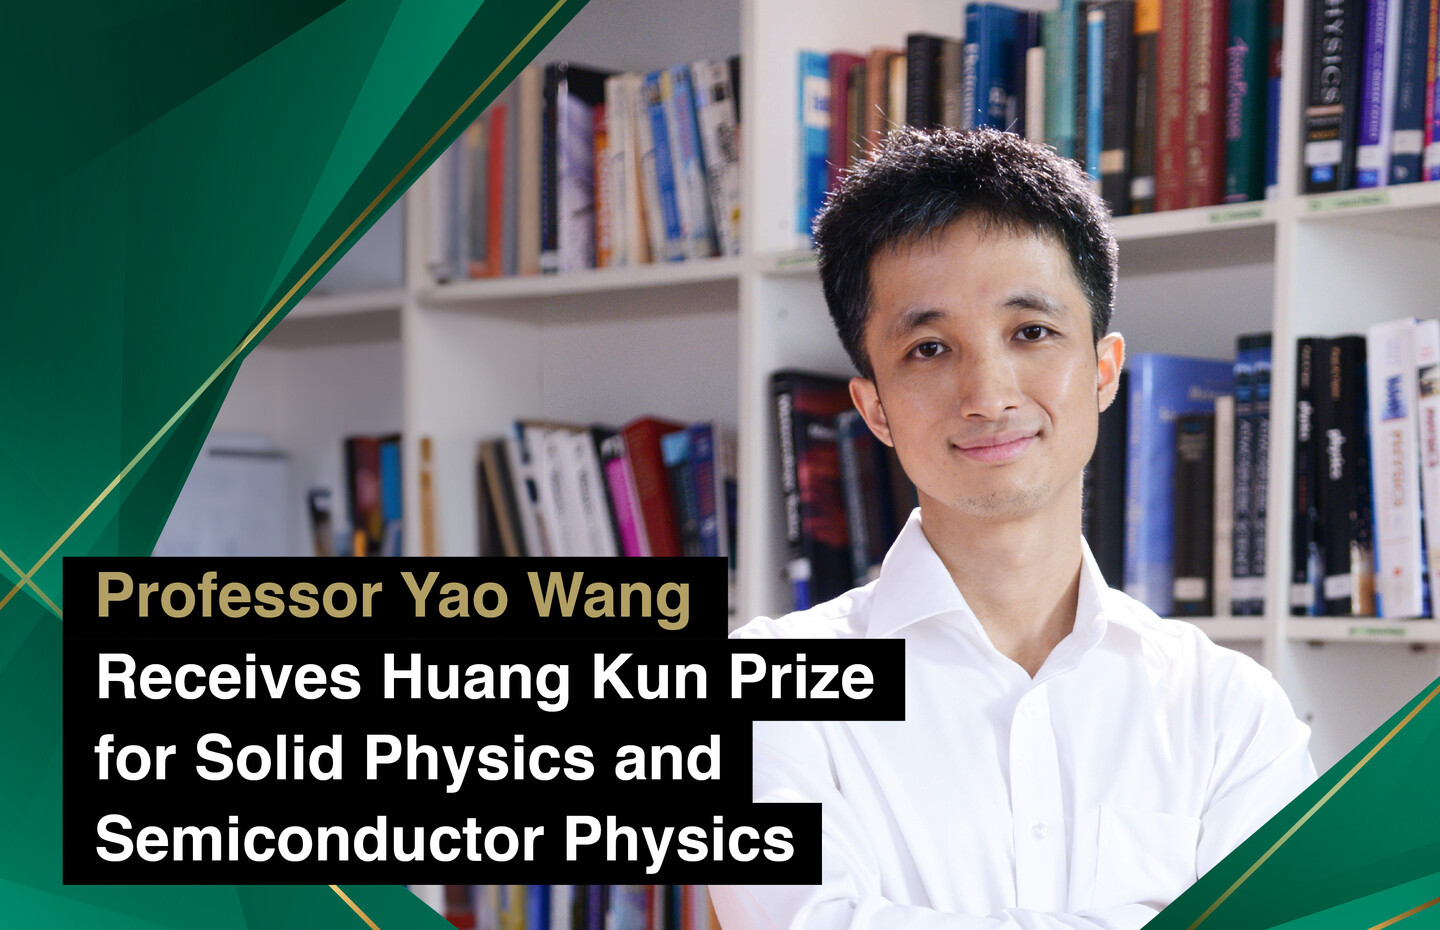 Professor Yao Wang Receives Huang Kun Prize for Solid Physics and Semiconductor Physics